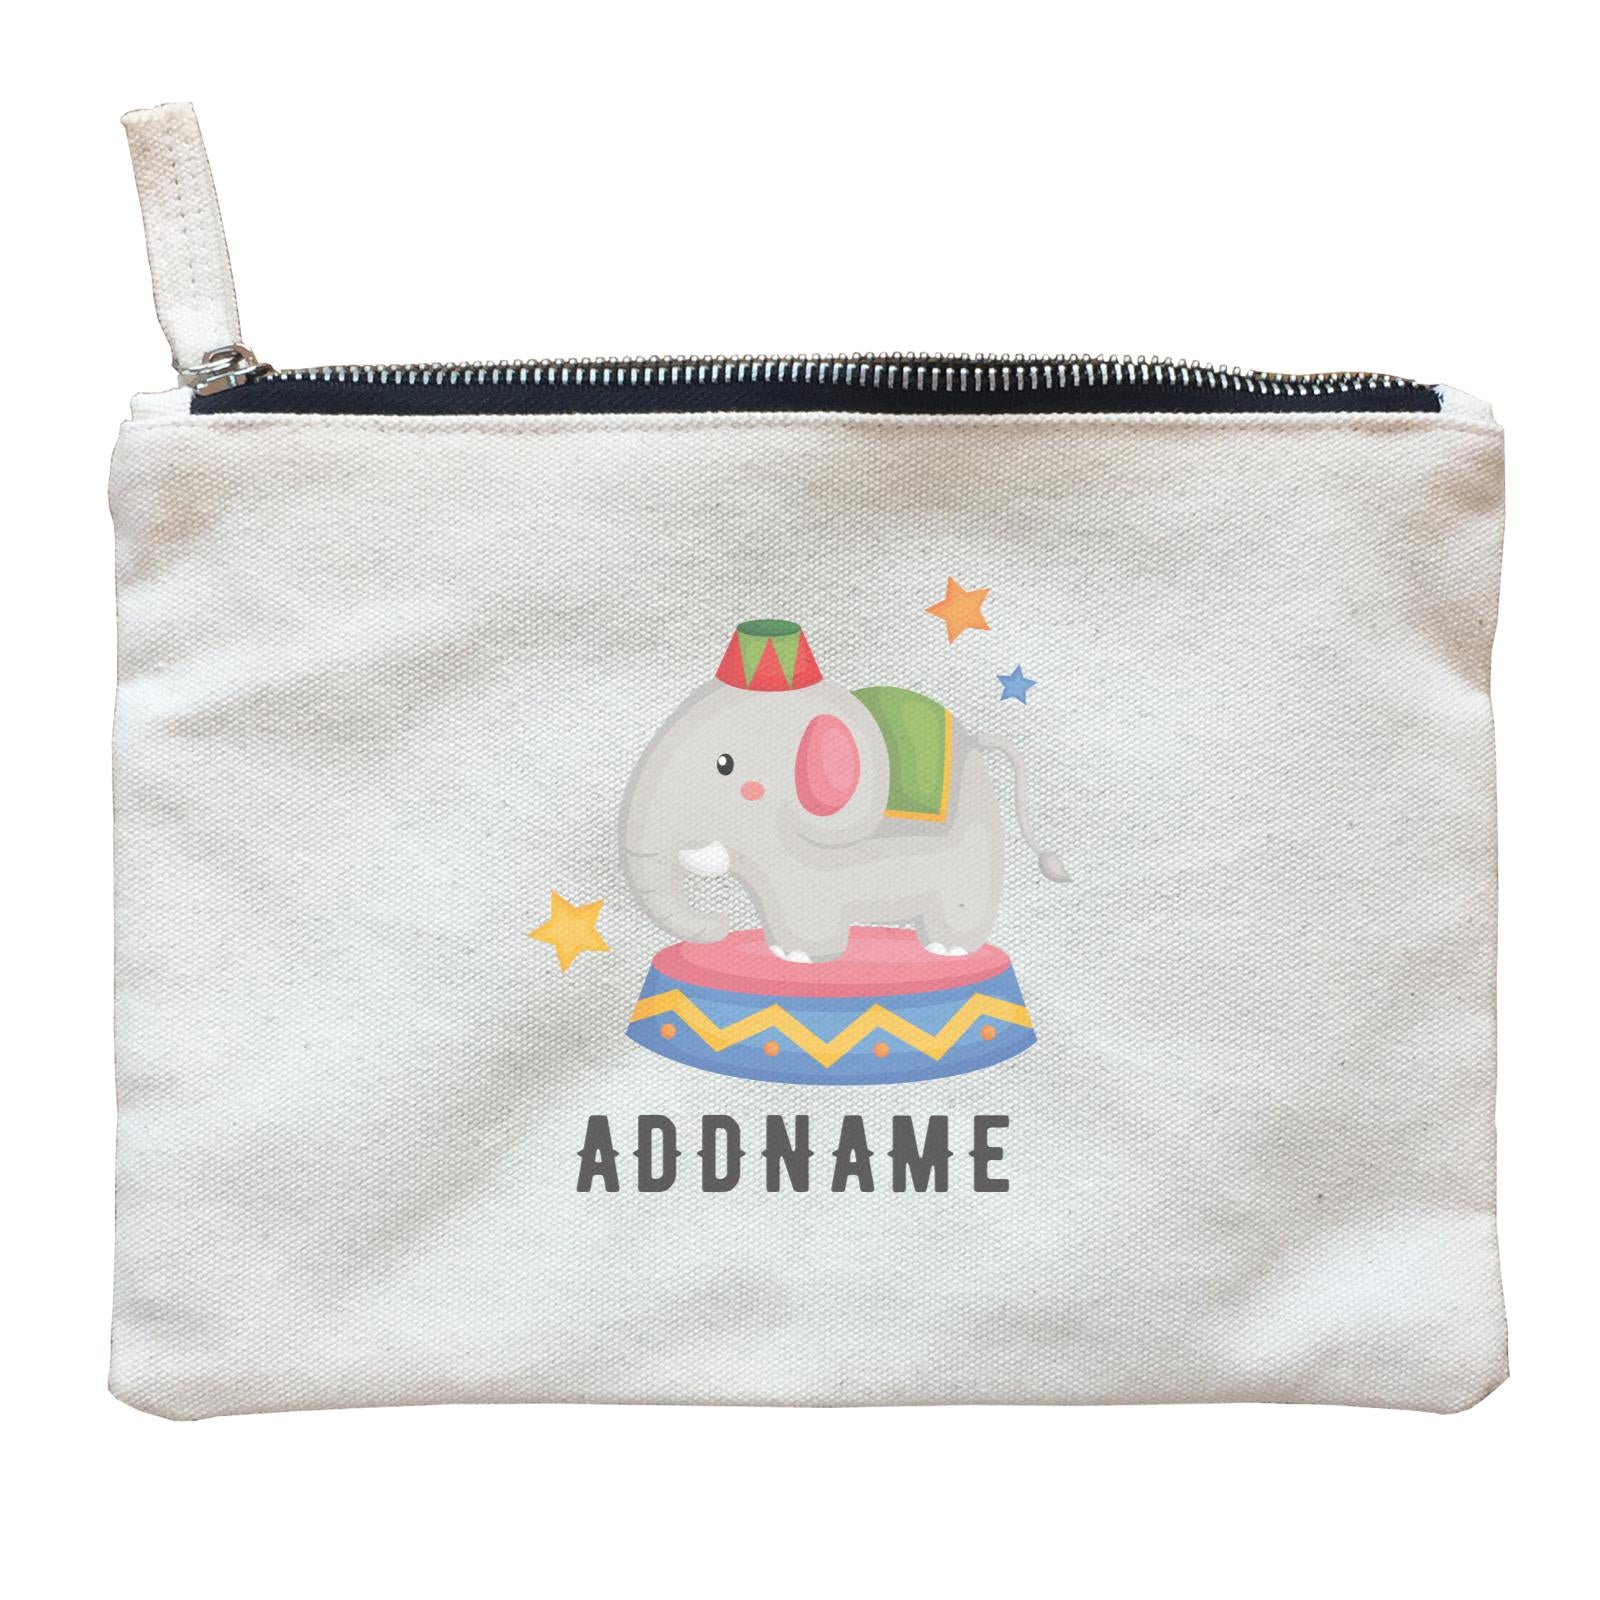 Birthday Circus Elephant Performance Addname Zipper Pouch